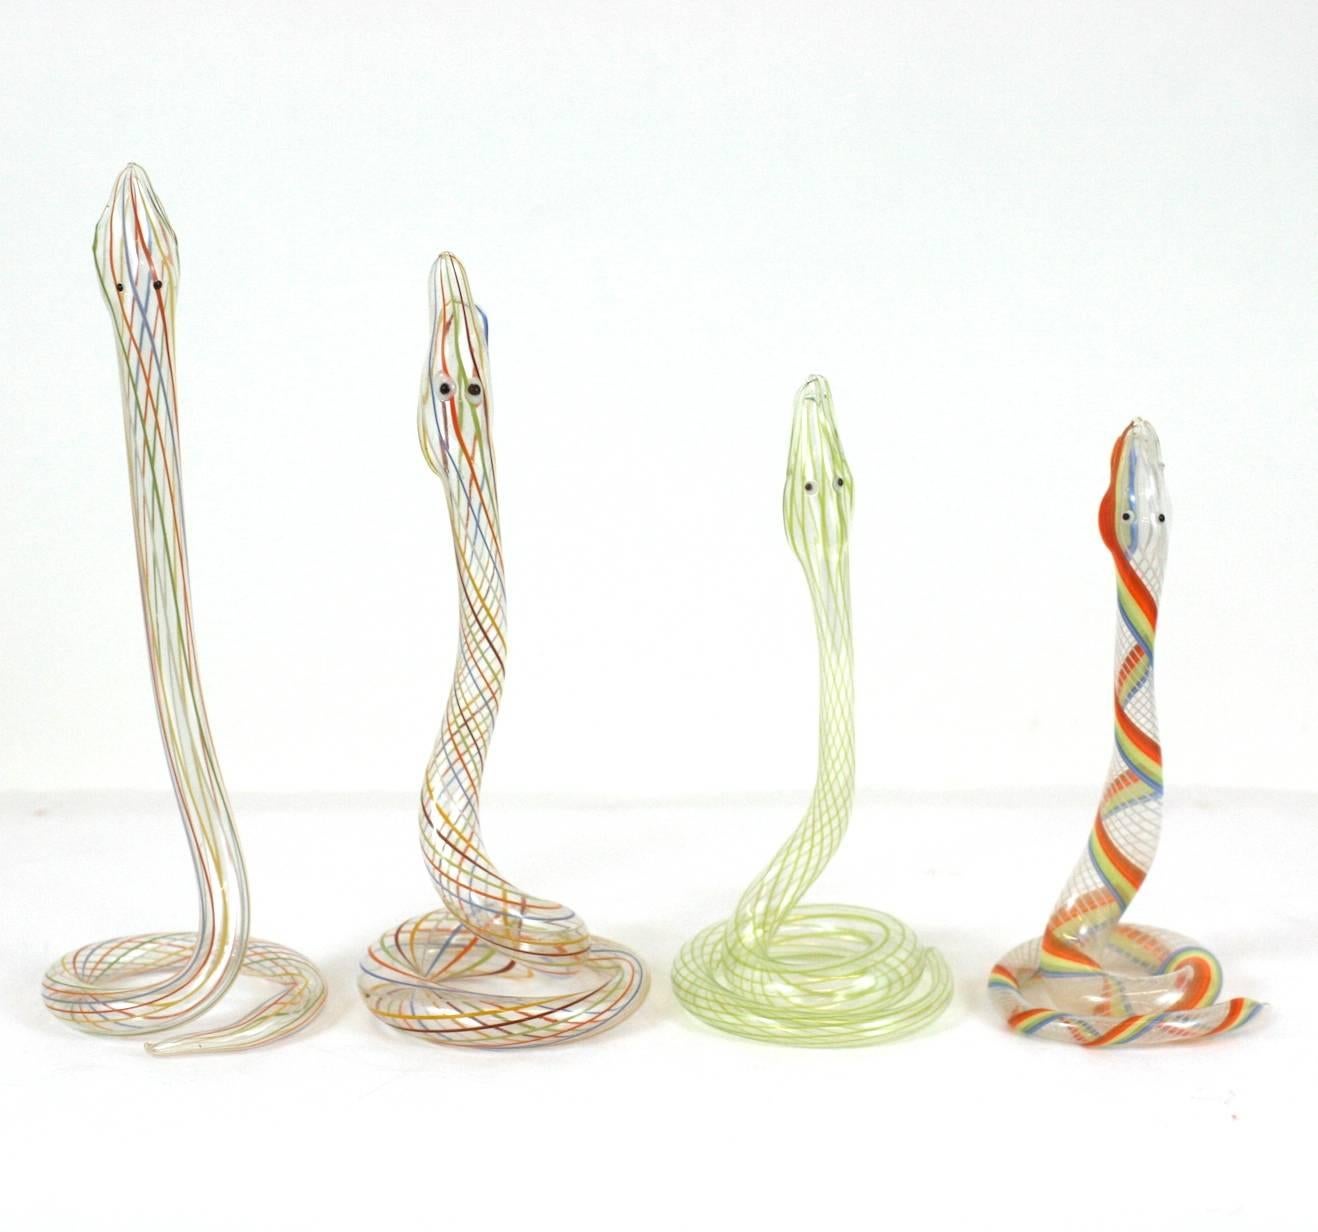 Charming multicolored snake bud vases by Bimini. Various sizes and colorings with very cartoon faces. Incredibly delicate, paper thin glass from the deco period, Germany, 1930s.
Range in sizes: 9